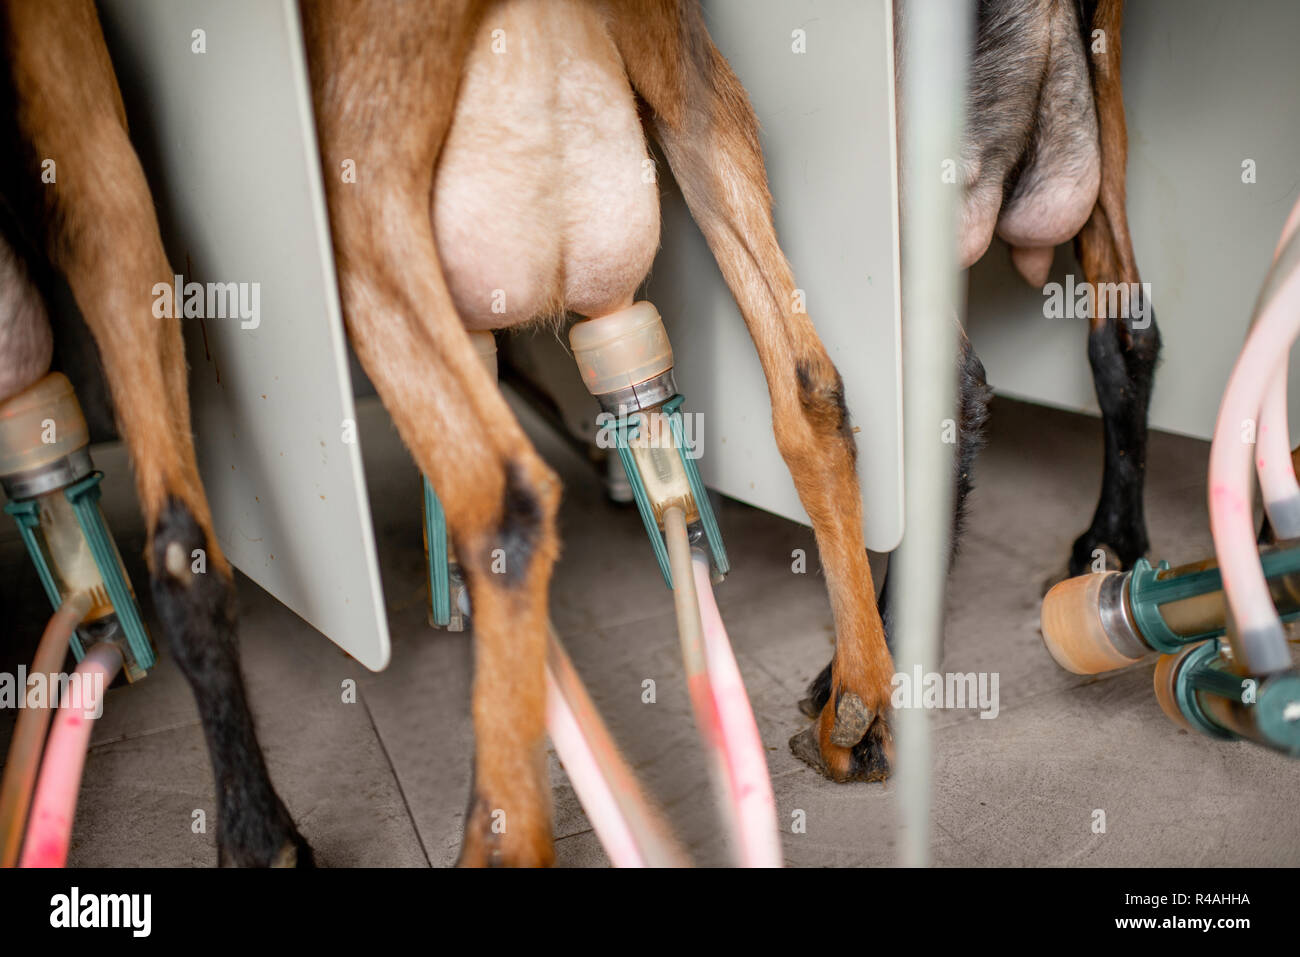 Automated goat milking process, close-up view Stock Photo